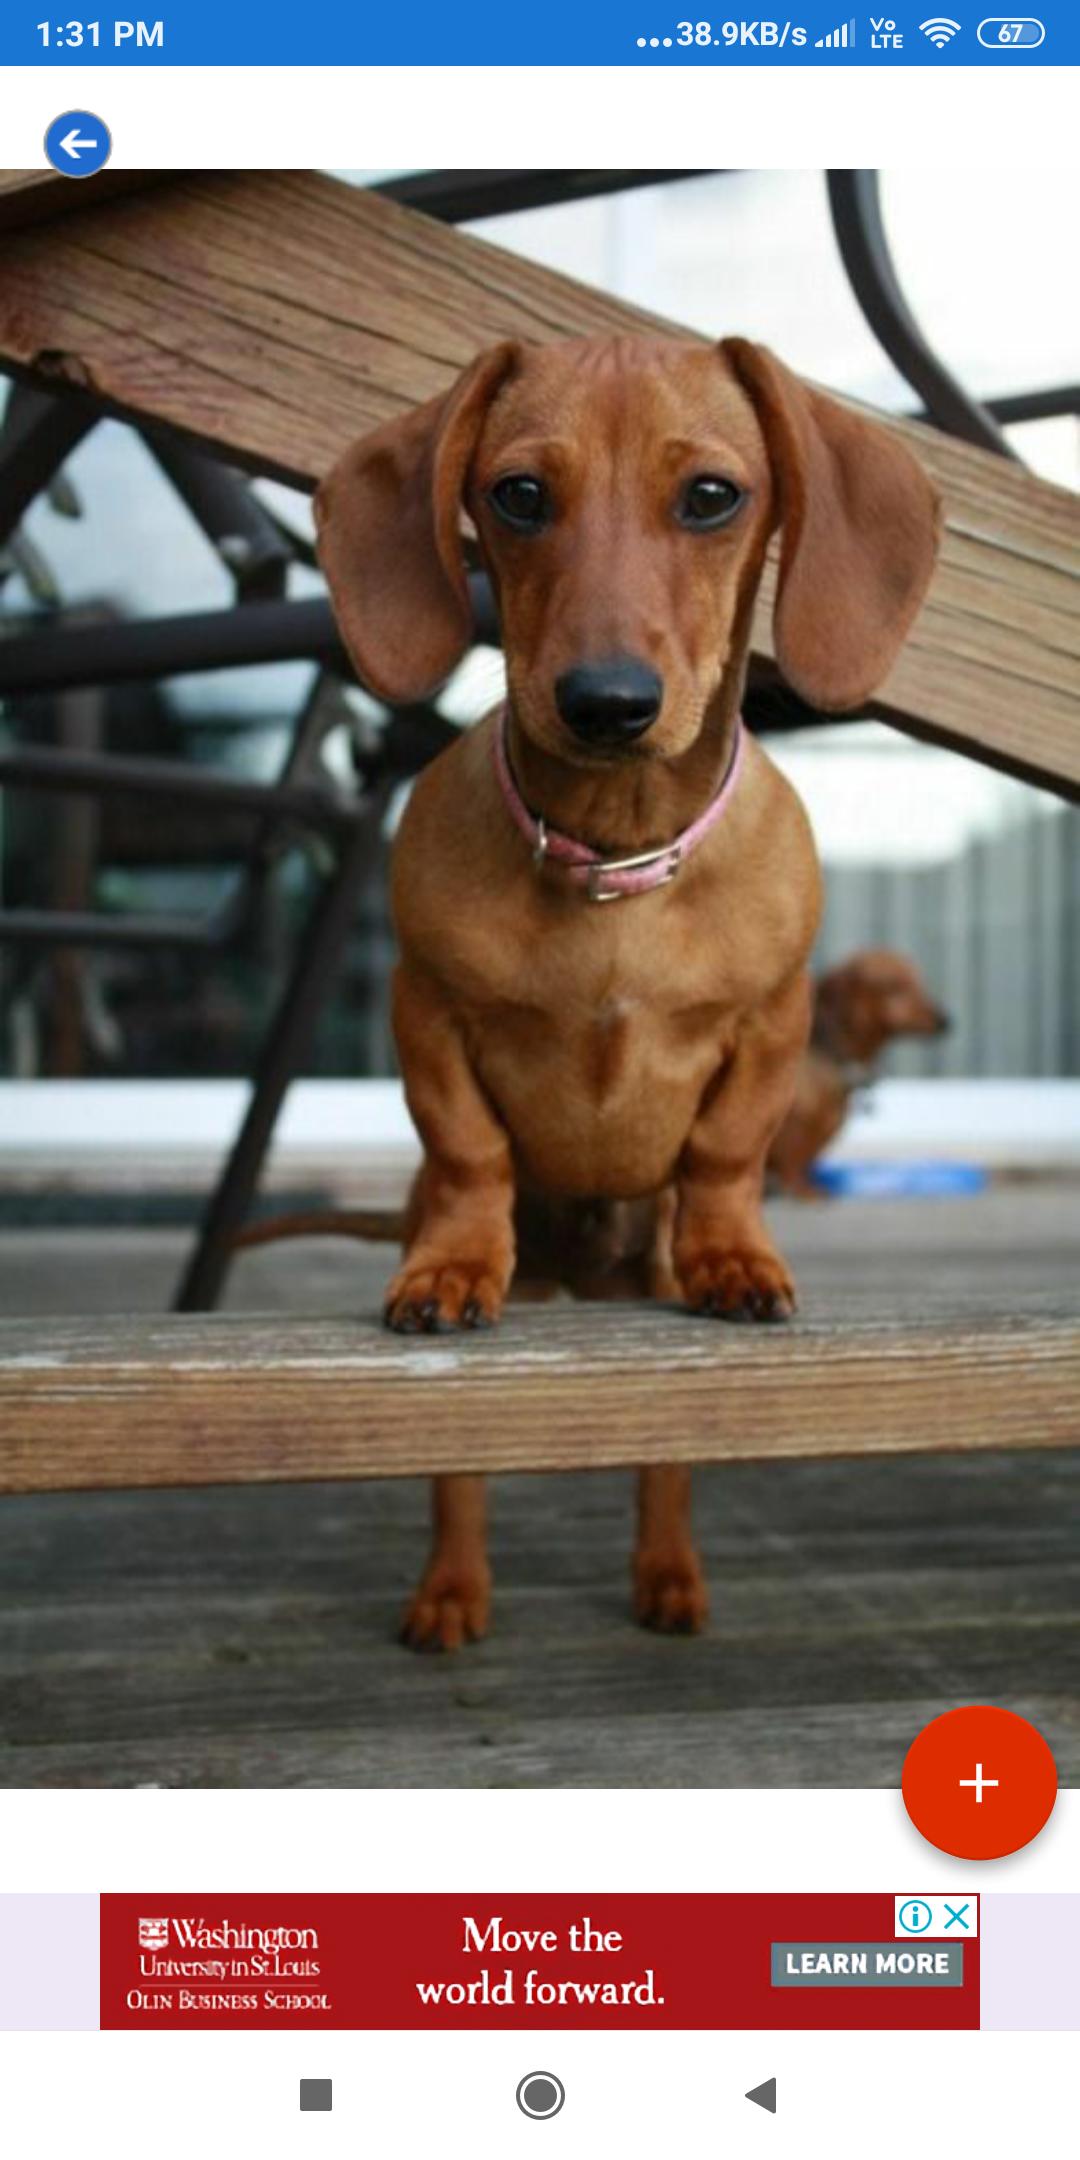 Dachshund Wallpapers: HD Images,Free Pics download 2.0.37 Screenshot 4